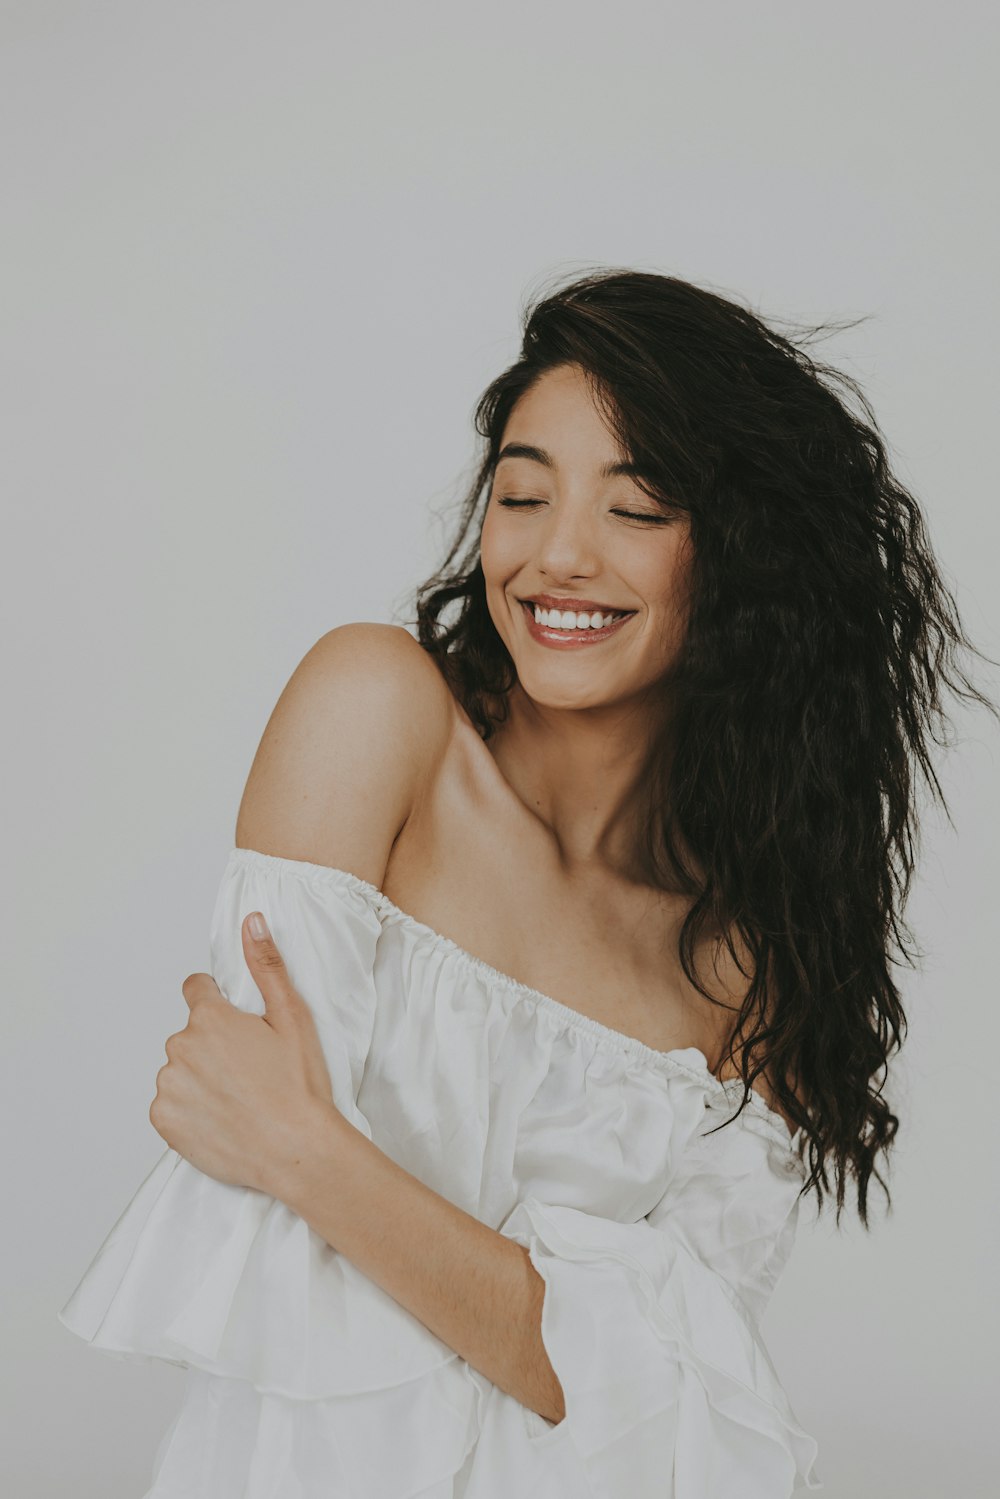 a woman with long hair smiling and wearing a white top